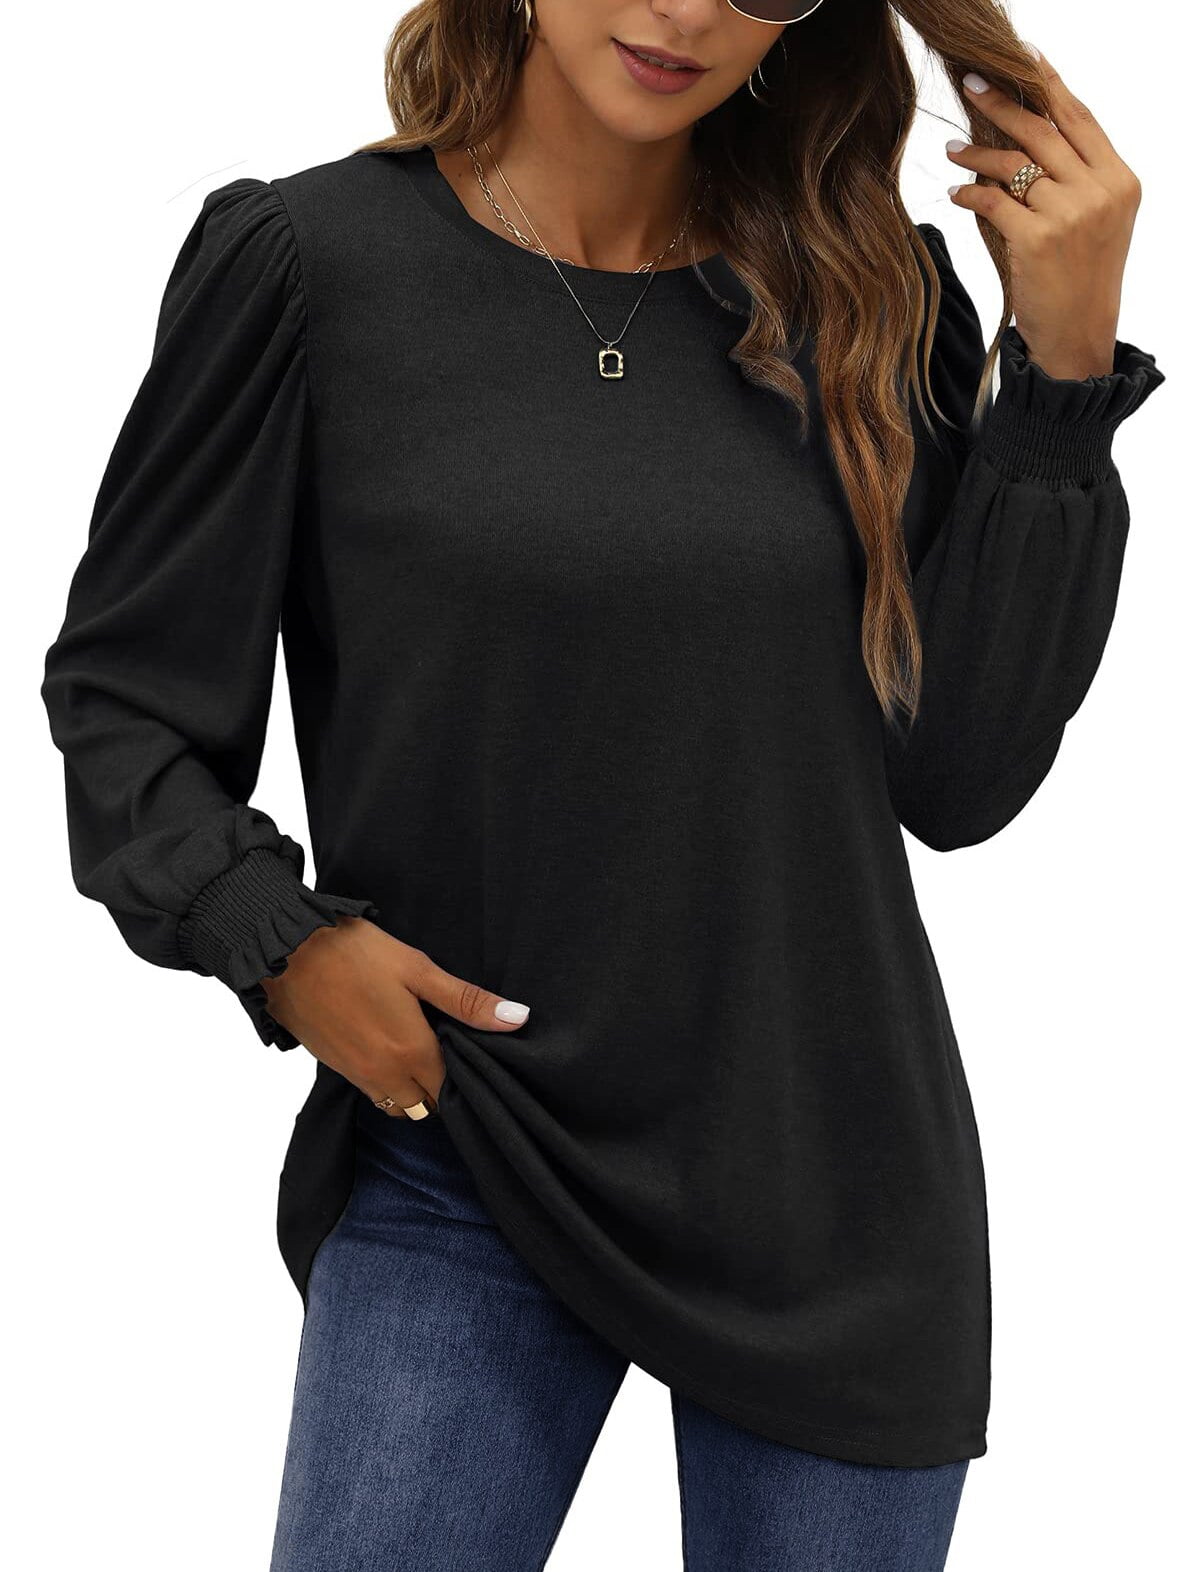 Fantaslook Blouses for Women Dressy Puff Sleeve Tunic Tops Casual Fall ...